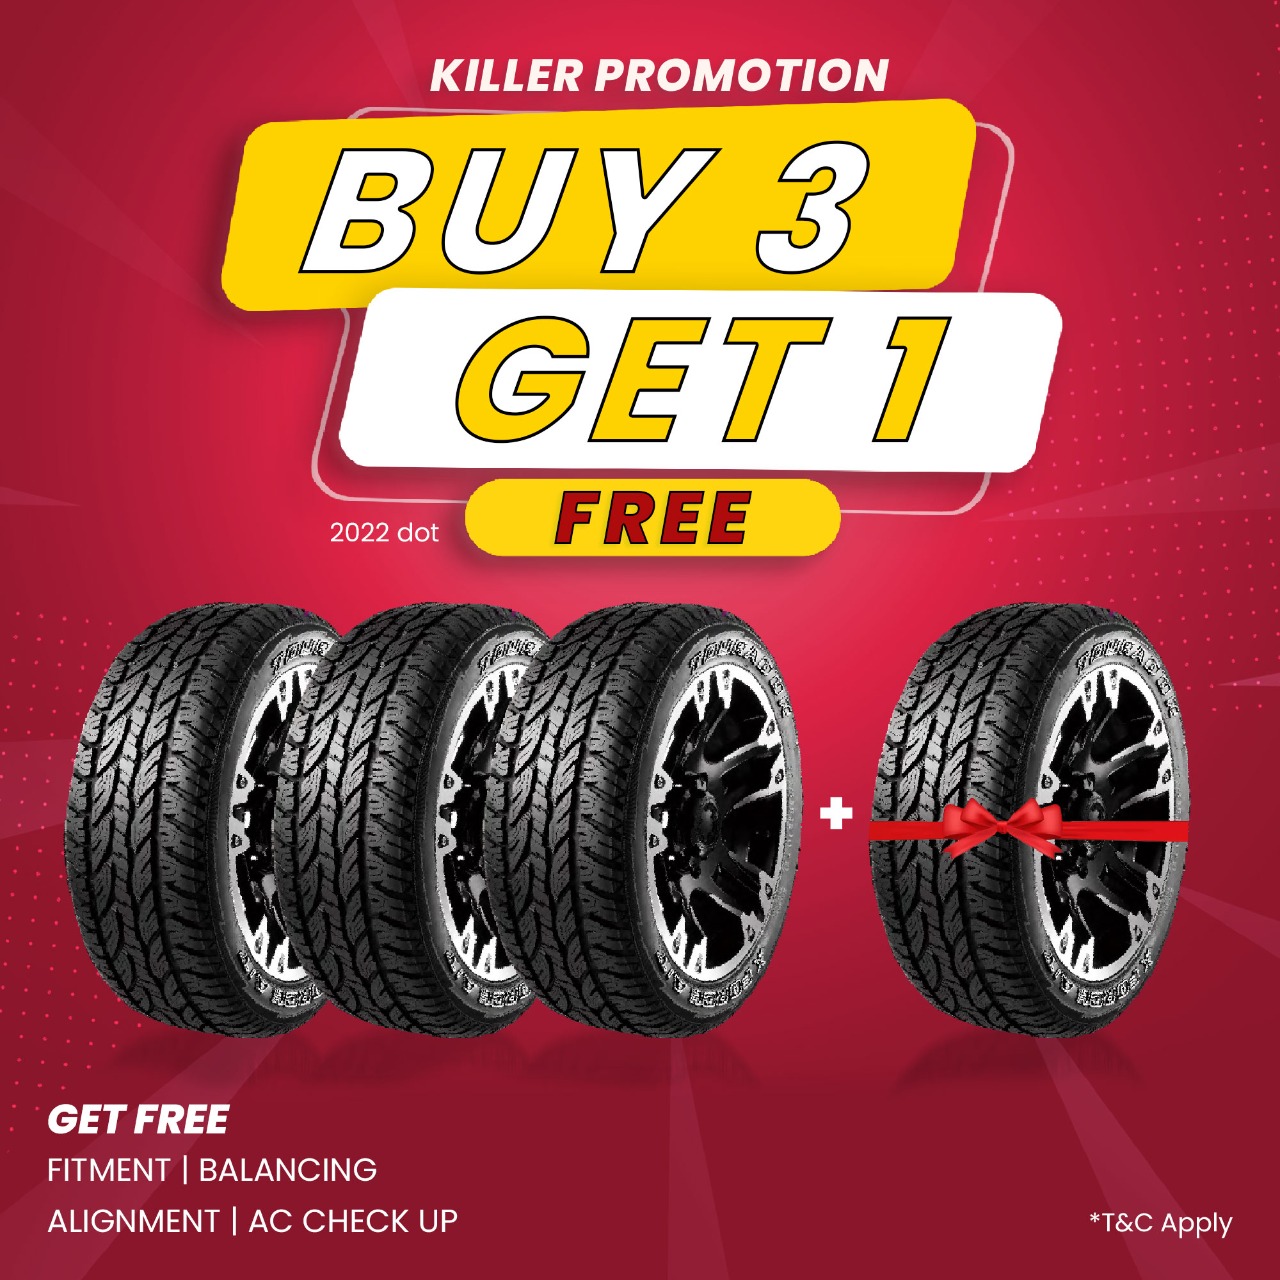 Buy 3 tires and get 1 free - promotion